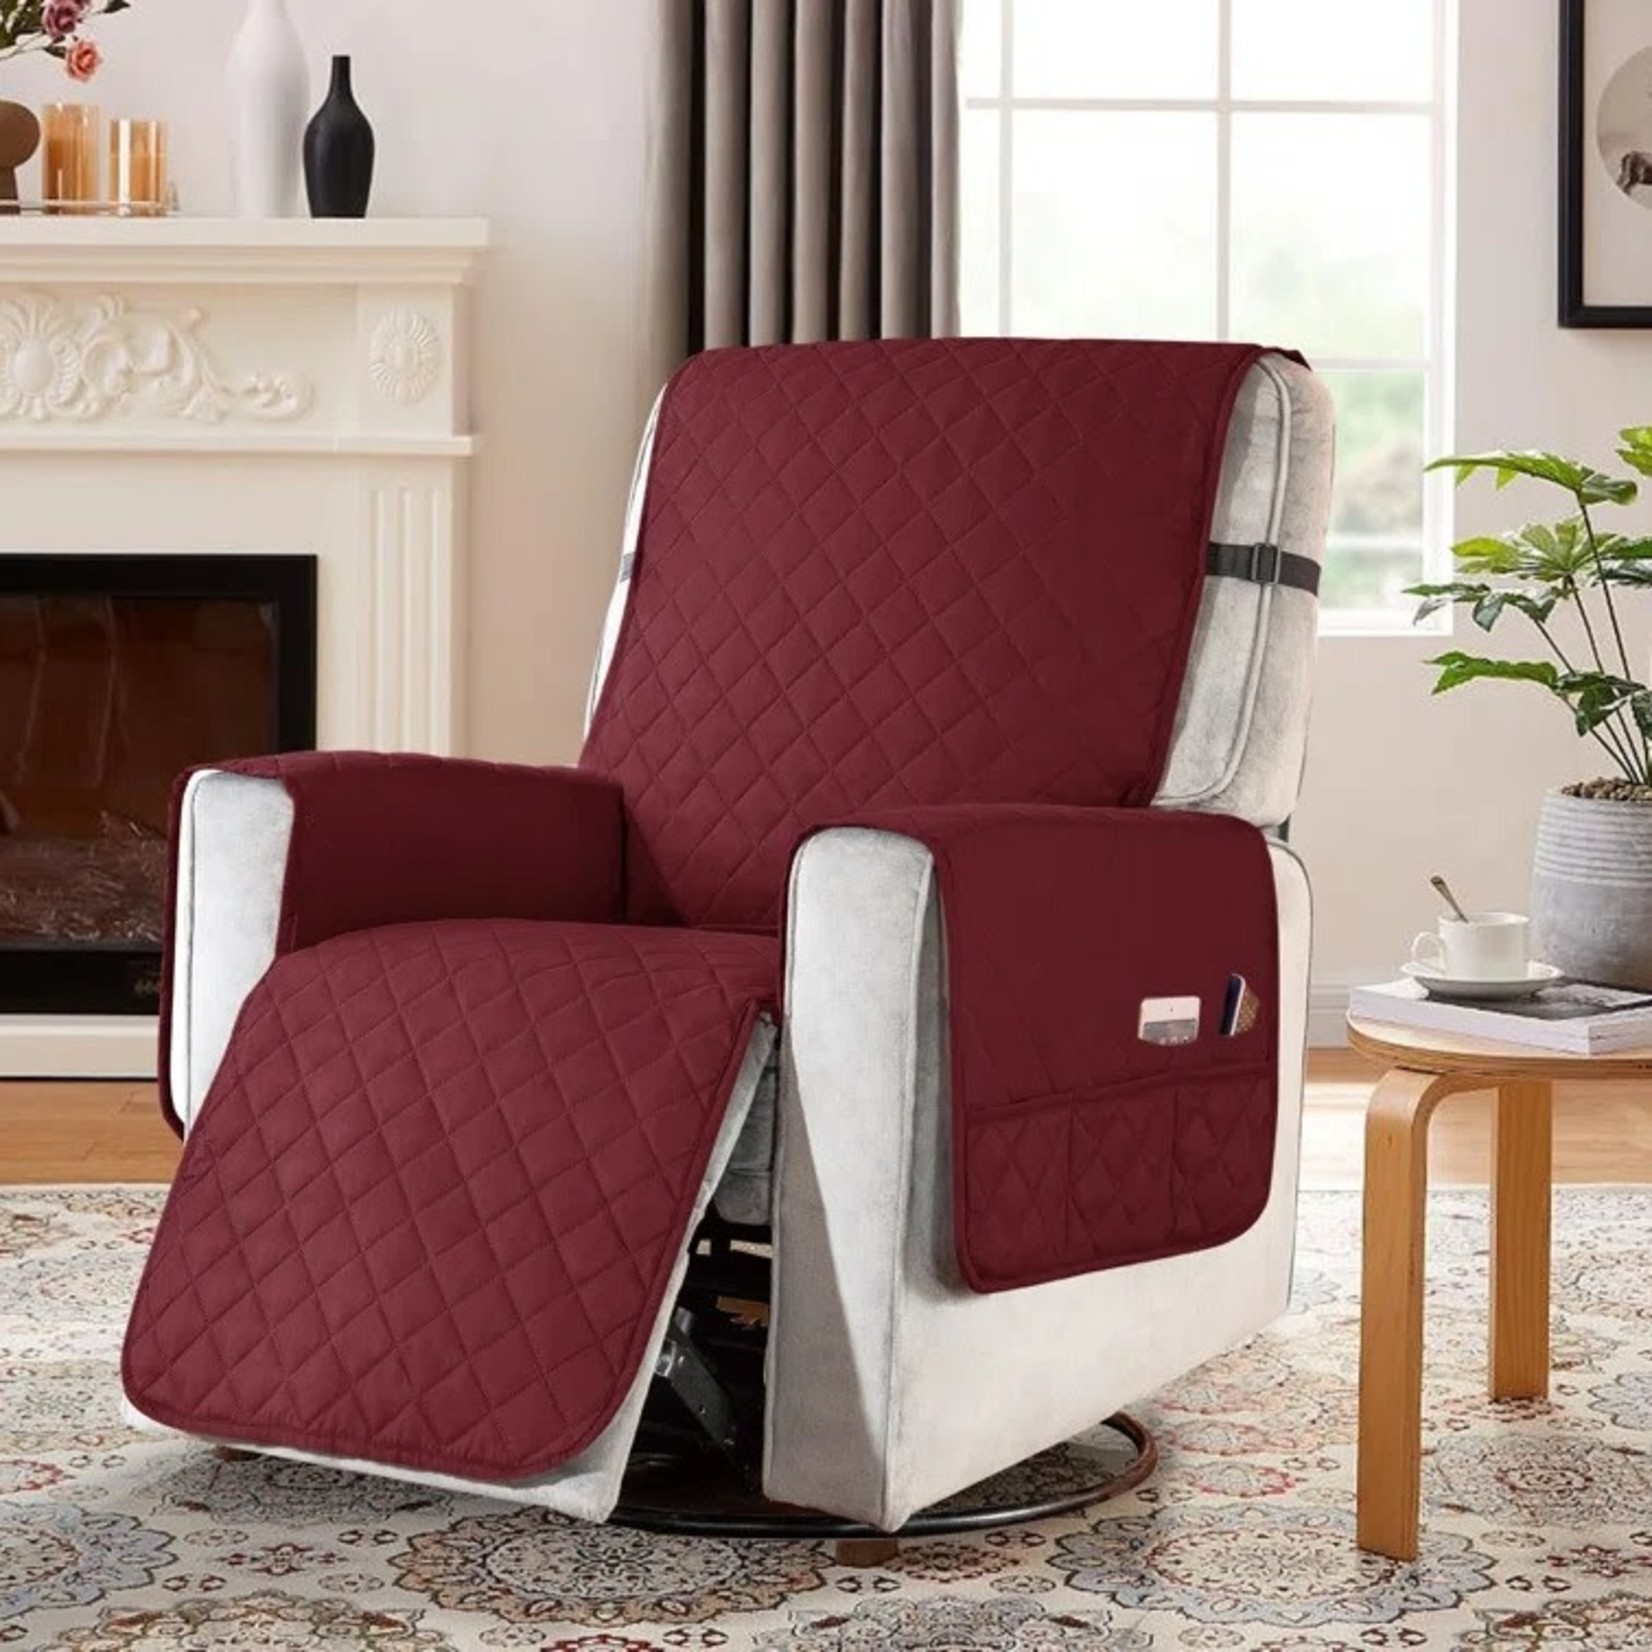 *Quilted Reversible Box Cushion Recliner Slipcover - Wine